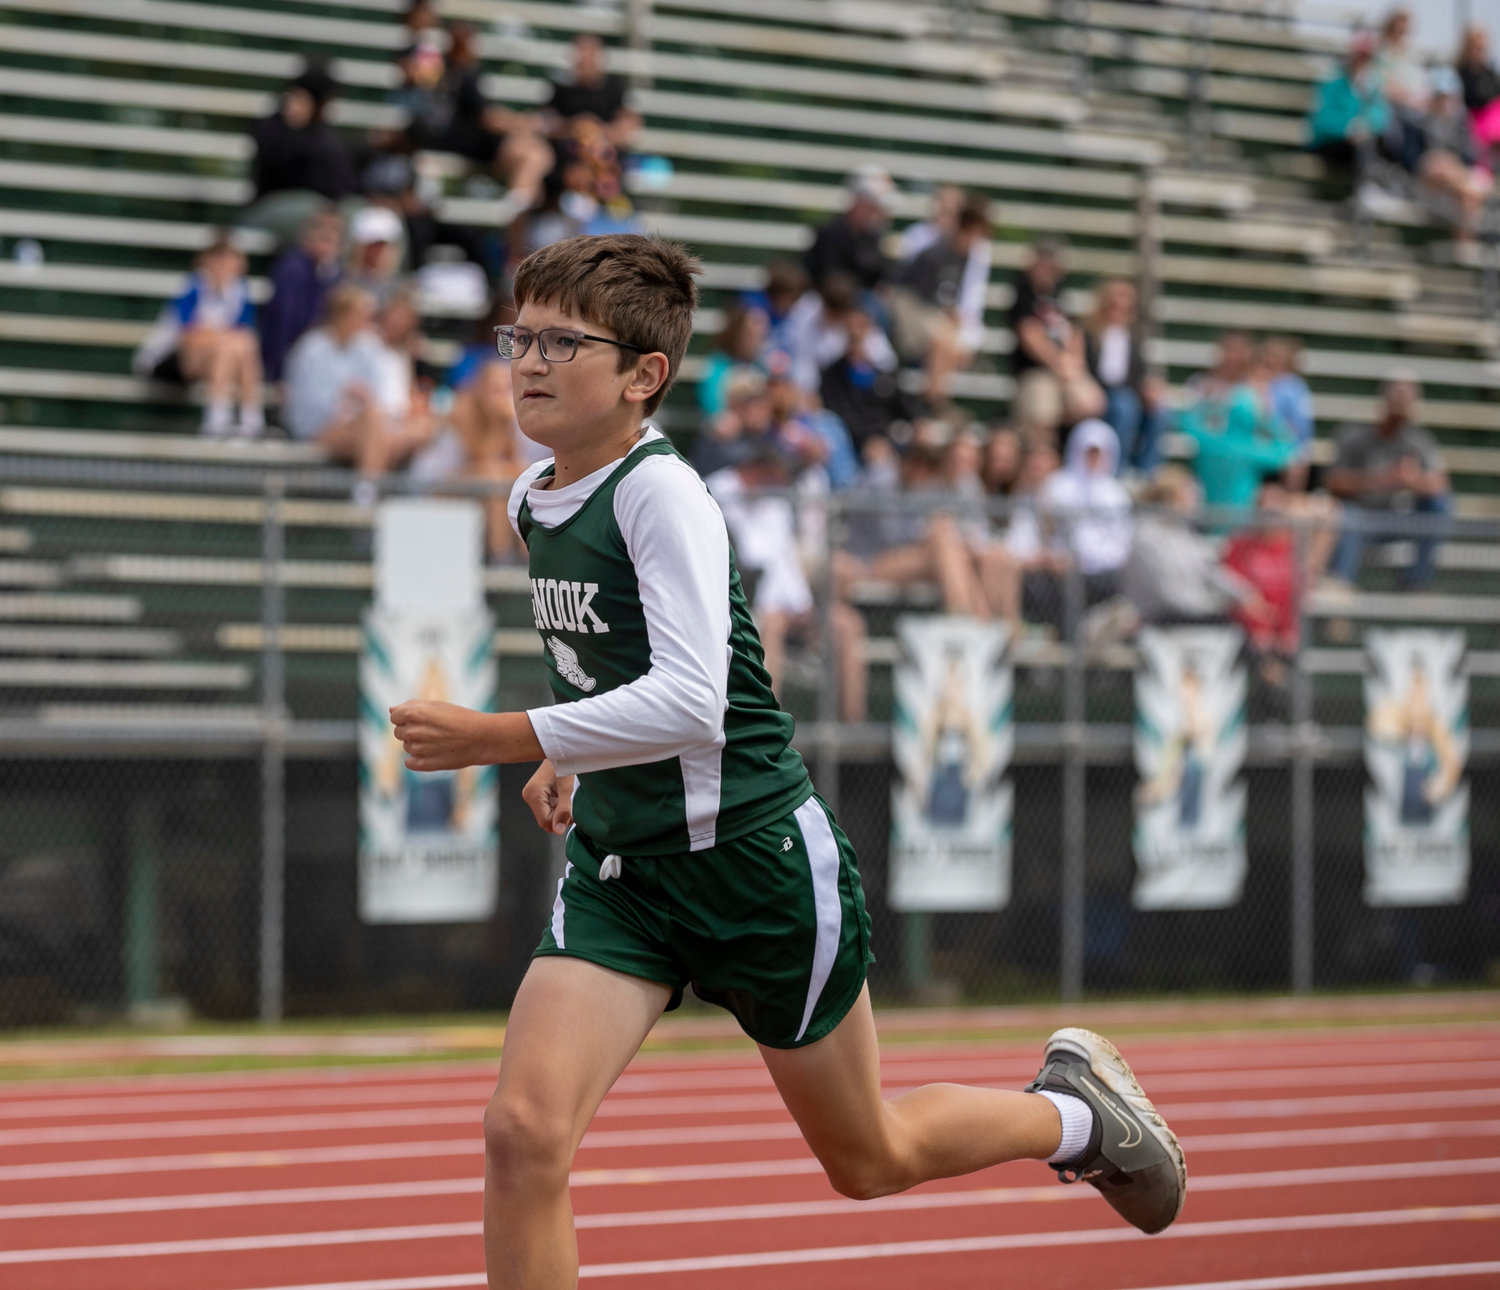 Jackson Yos eyes the finish line at the end of his 400-meter dash race at Gulf Shores’ Mickey Miller Blackwell Stadium during the opening day of the Alabama Independent School Association’s state track and field championships Thursday, April 14.